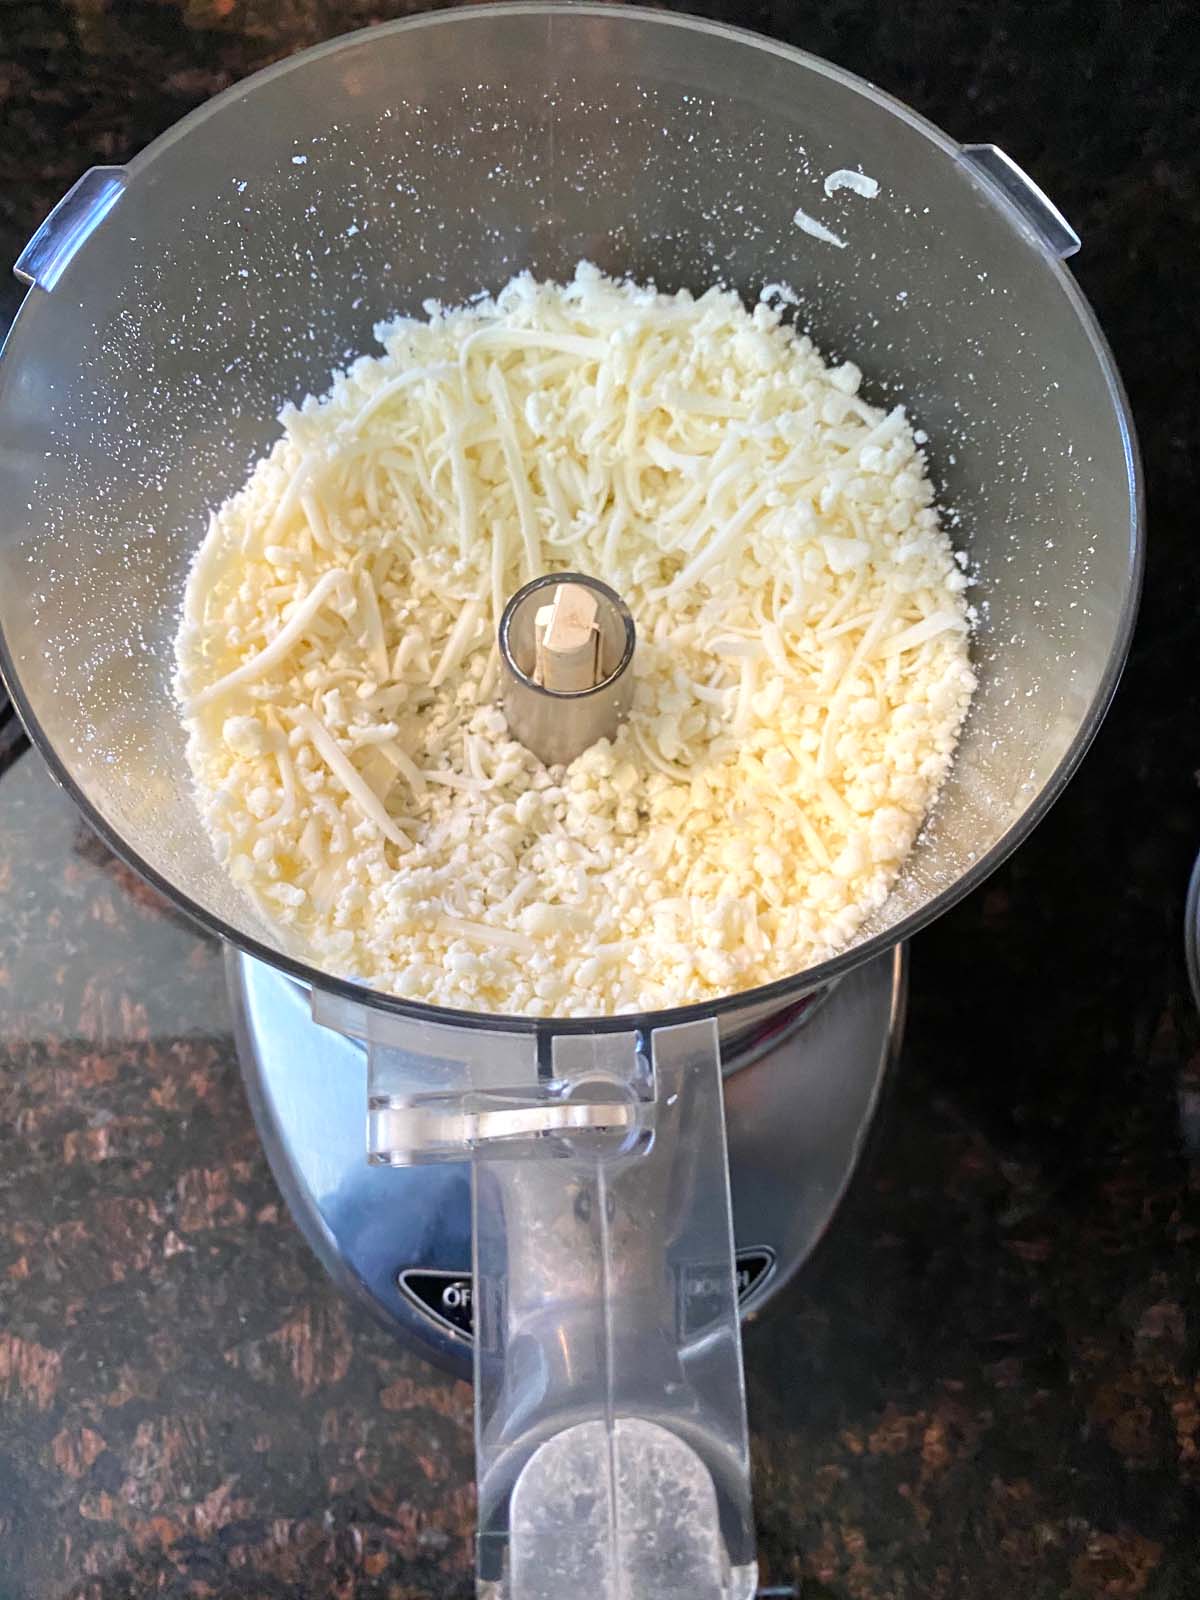 How To Shred Cheese With Ninja Food Processor